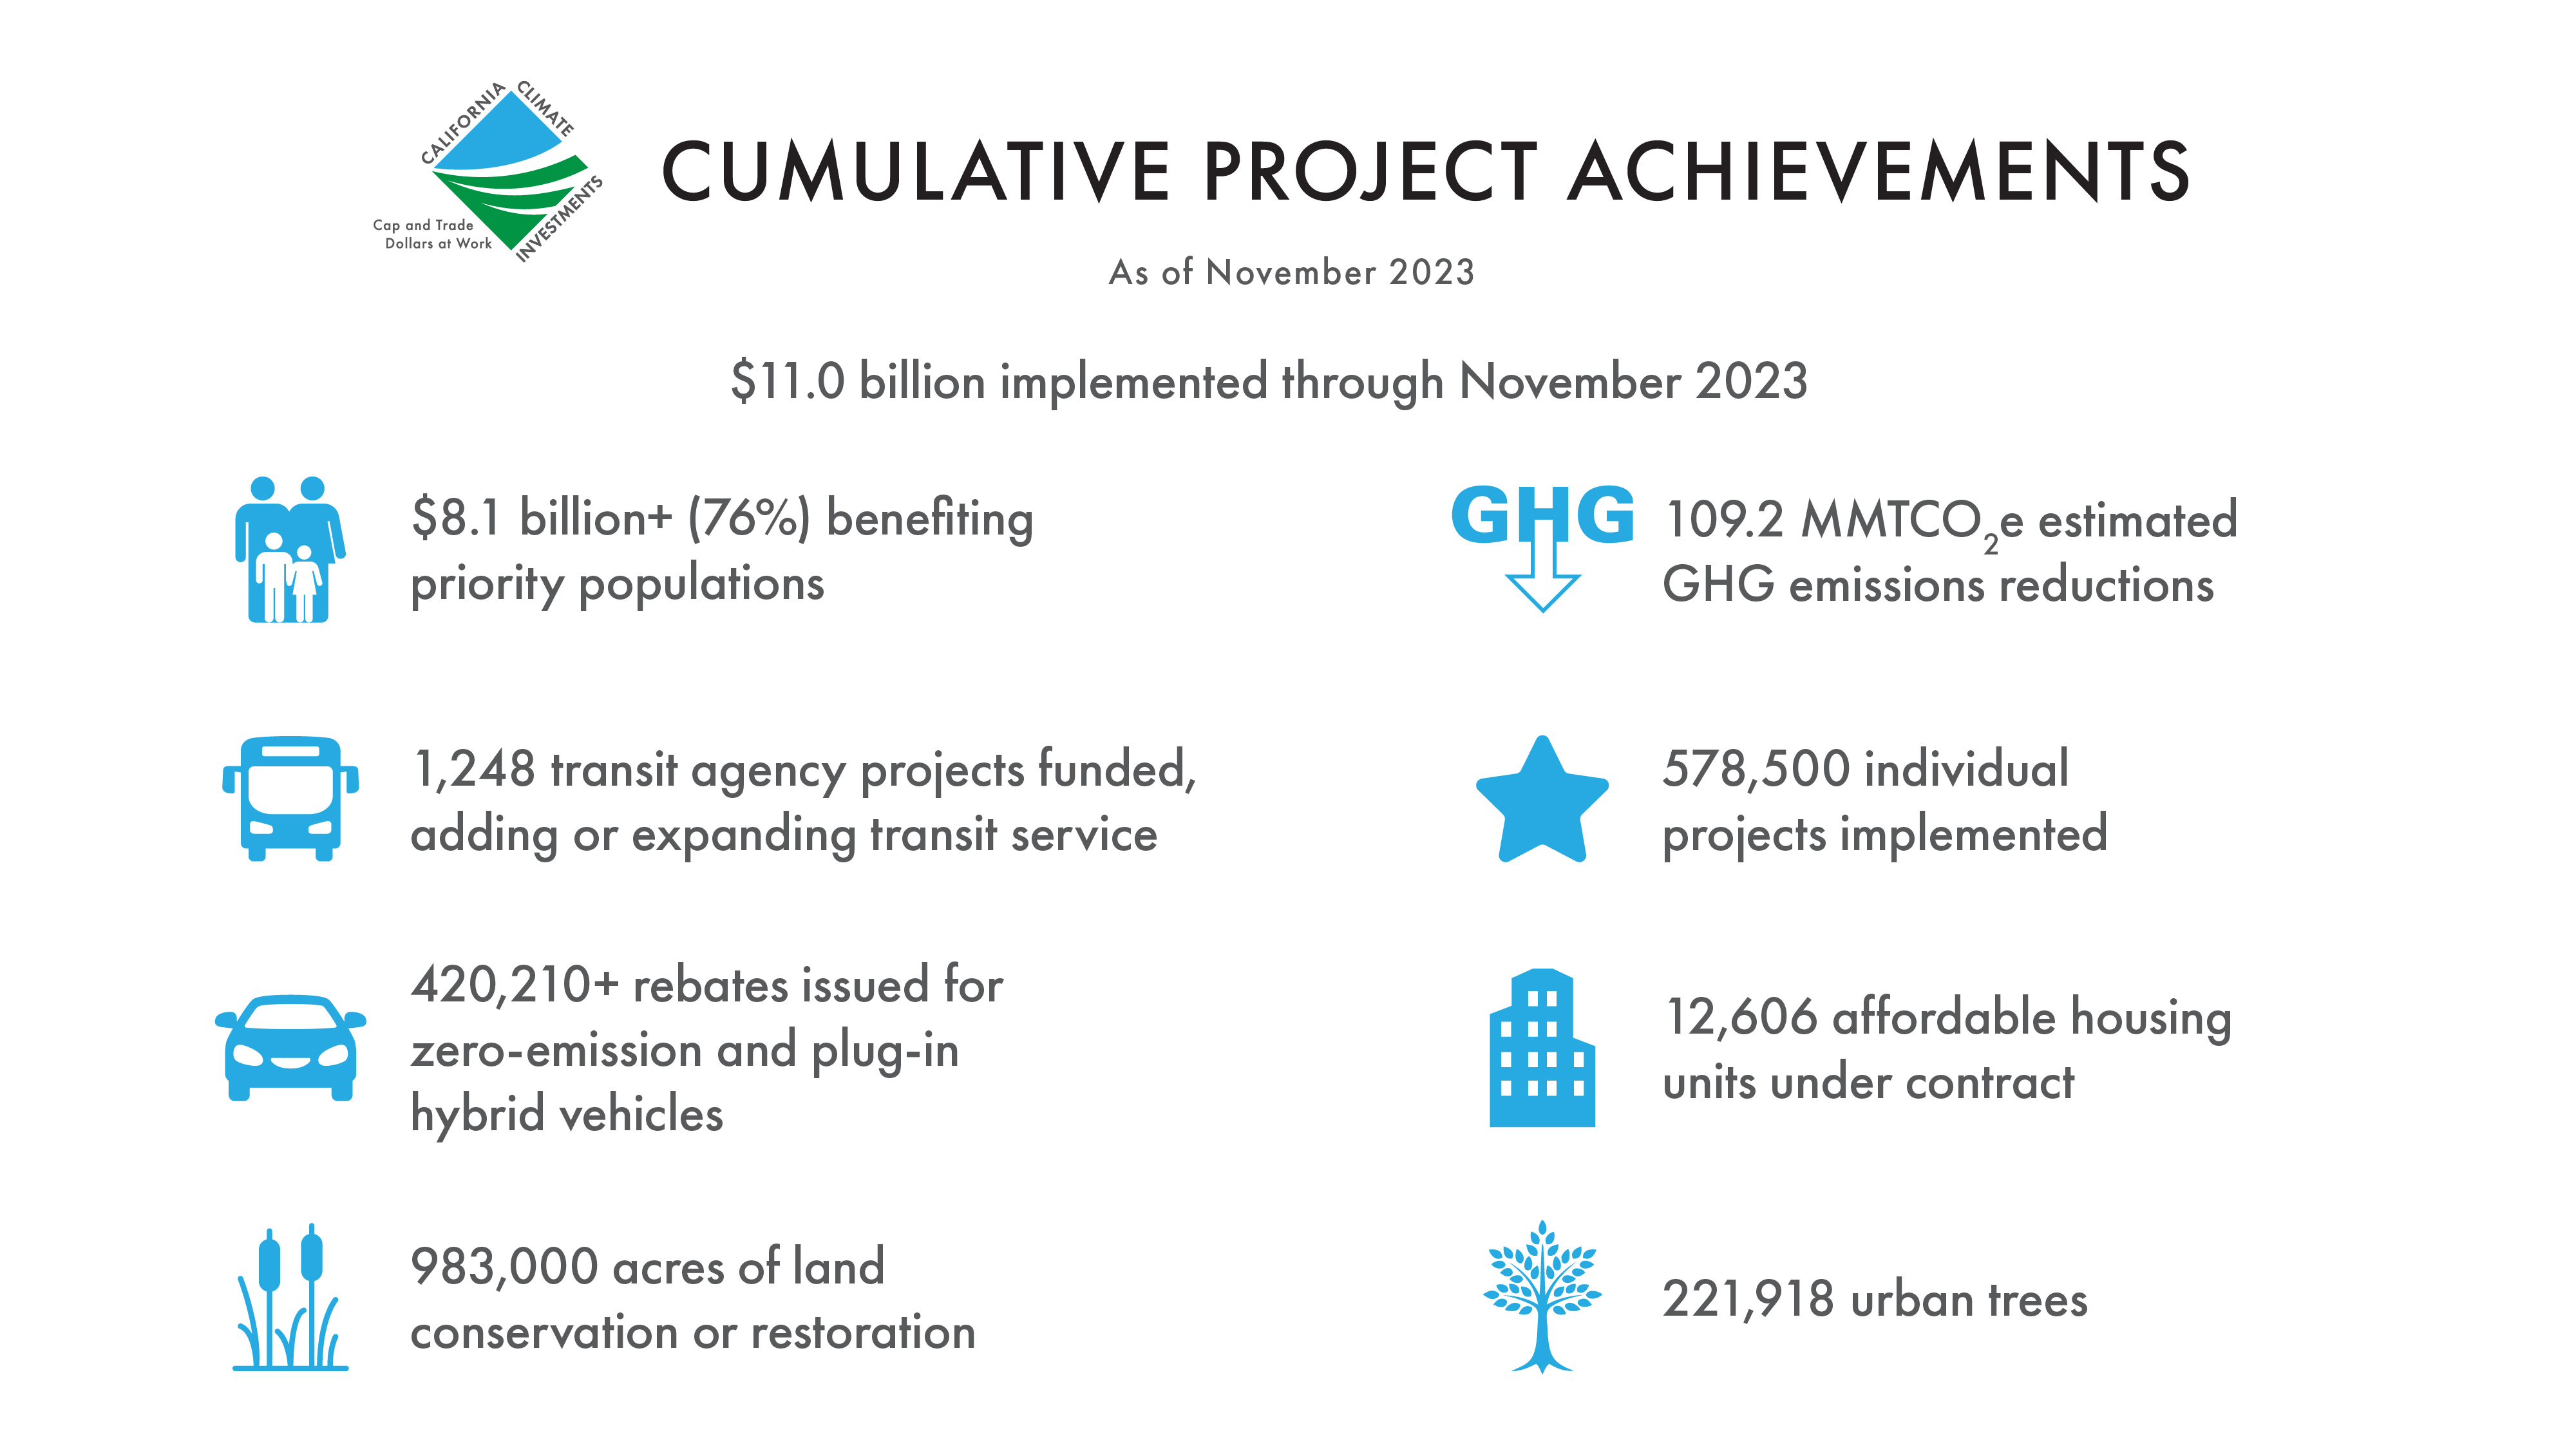 Cumulative Project Achievements - As of November 2023  $11.0billion implemented through November 2023  109.2 MMTCO2e estimated GHG emissions reductions  578,500 individual projects implemented  12,606affordable housing units under contract  221,918 urban trees  $8.1 billion+ (73%) benefiting priority populations  1,248 transit agency projects funded, adding or expanding transit service  420,210+ rebates issued for zero-emission and plug-in hybrid vehicles  983,000 acres of land conservation or restoration 